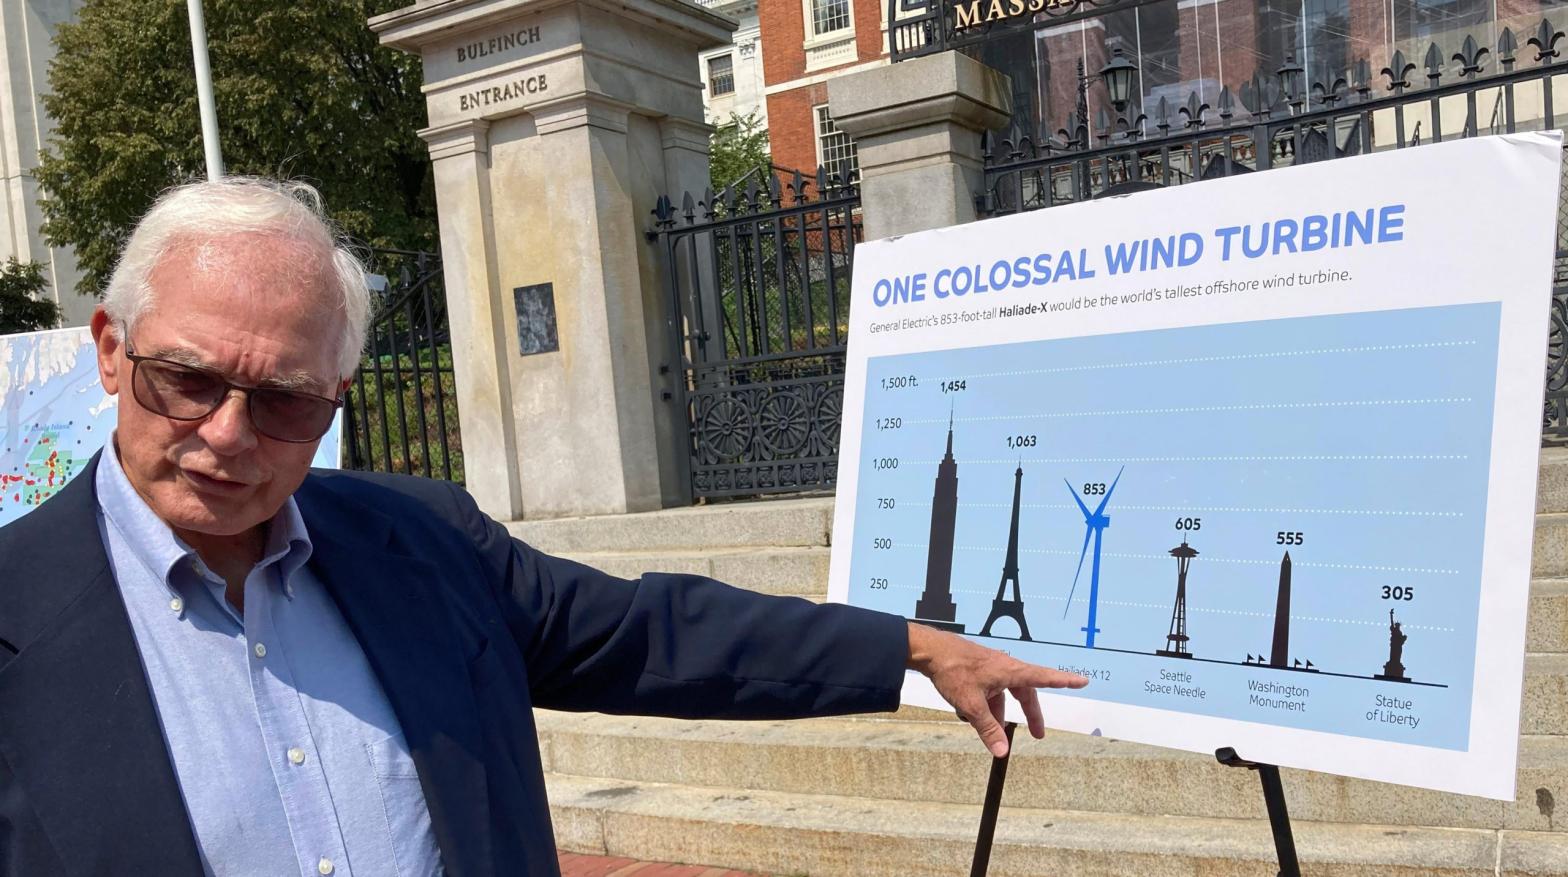 David Stevenson, policy director at the Caesar Rodney Institute and former Trump adviser, points to a placard that features images of landmarks and a wind turbine, while facing reporters Wednesday, Aug. 25, 2021, in front of the Statehouse, in Boston. (Photo: Philip Marcelo, AP)